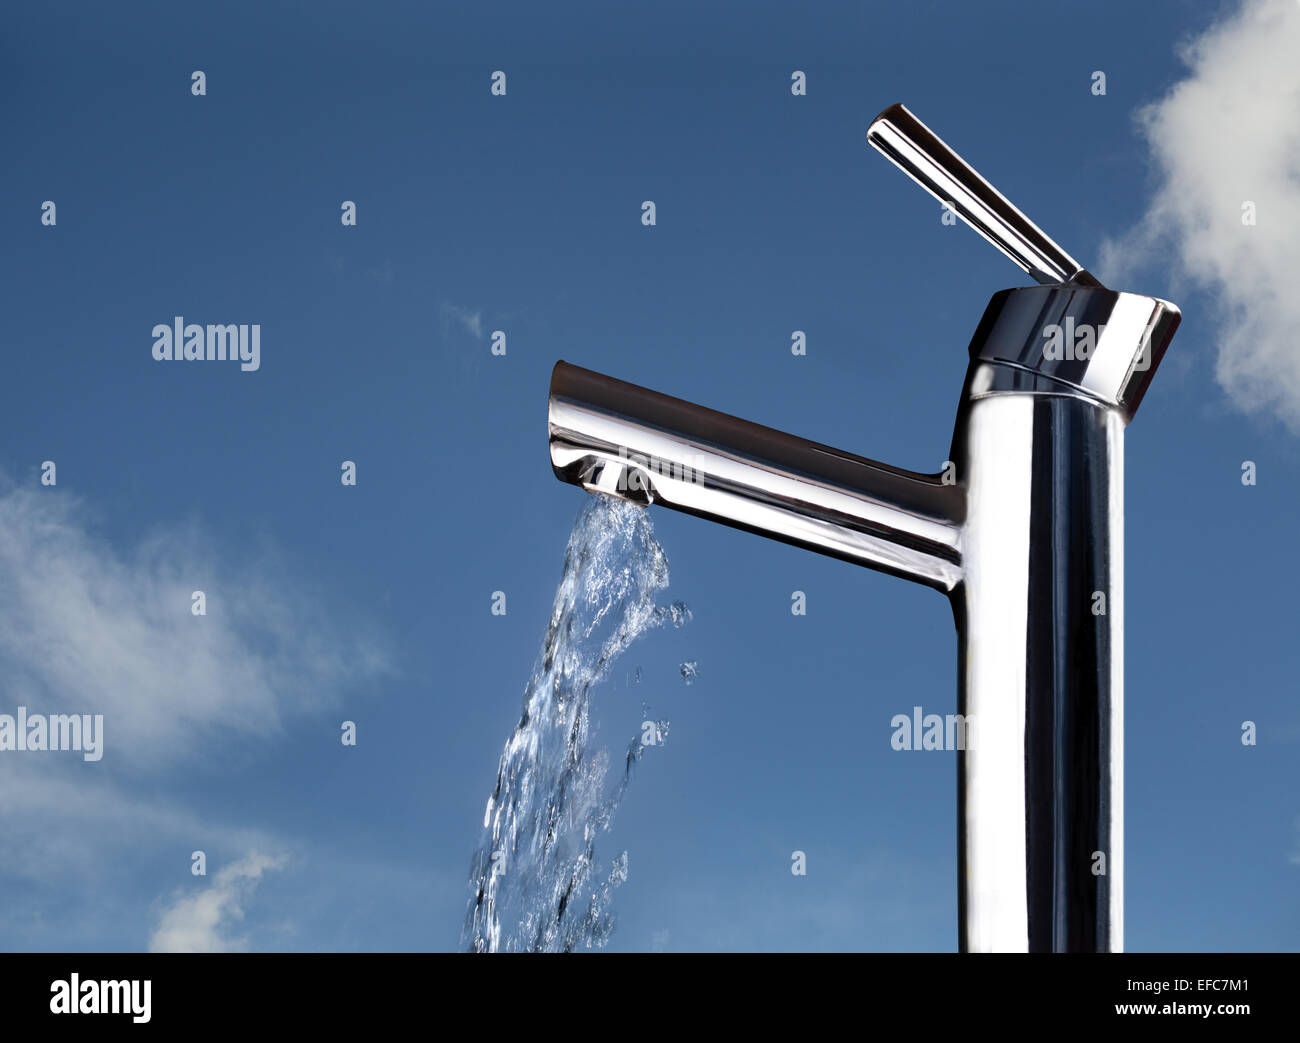 A faucet with water running, shown against a blue lightly clouded sky indicating freshness, purity, wastage etc. Stock Photo